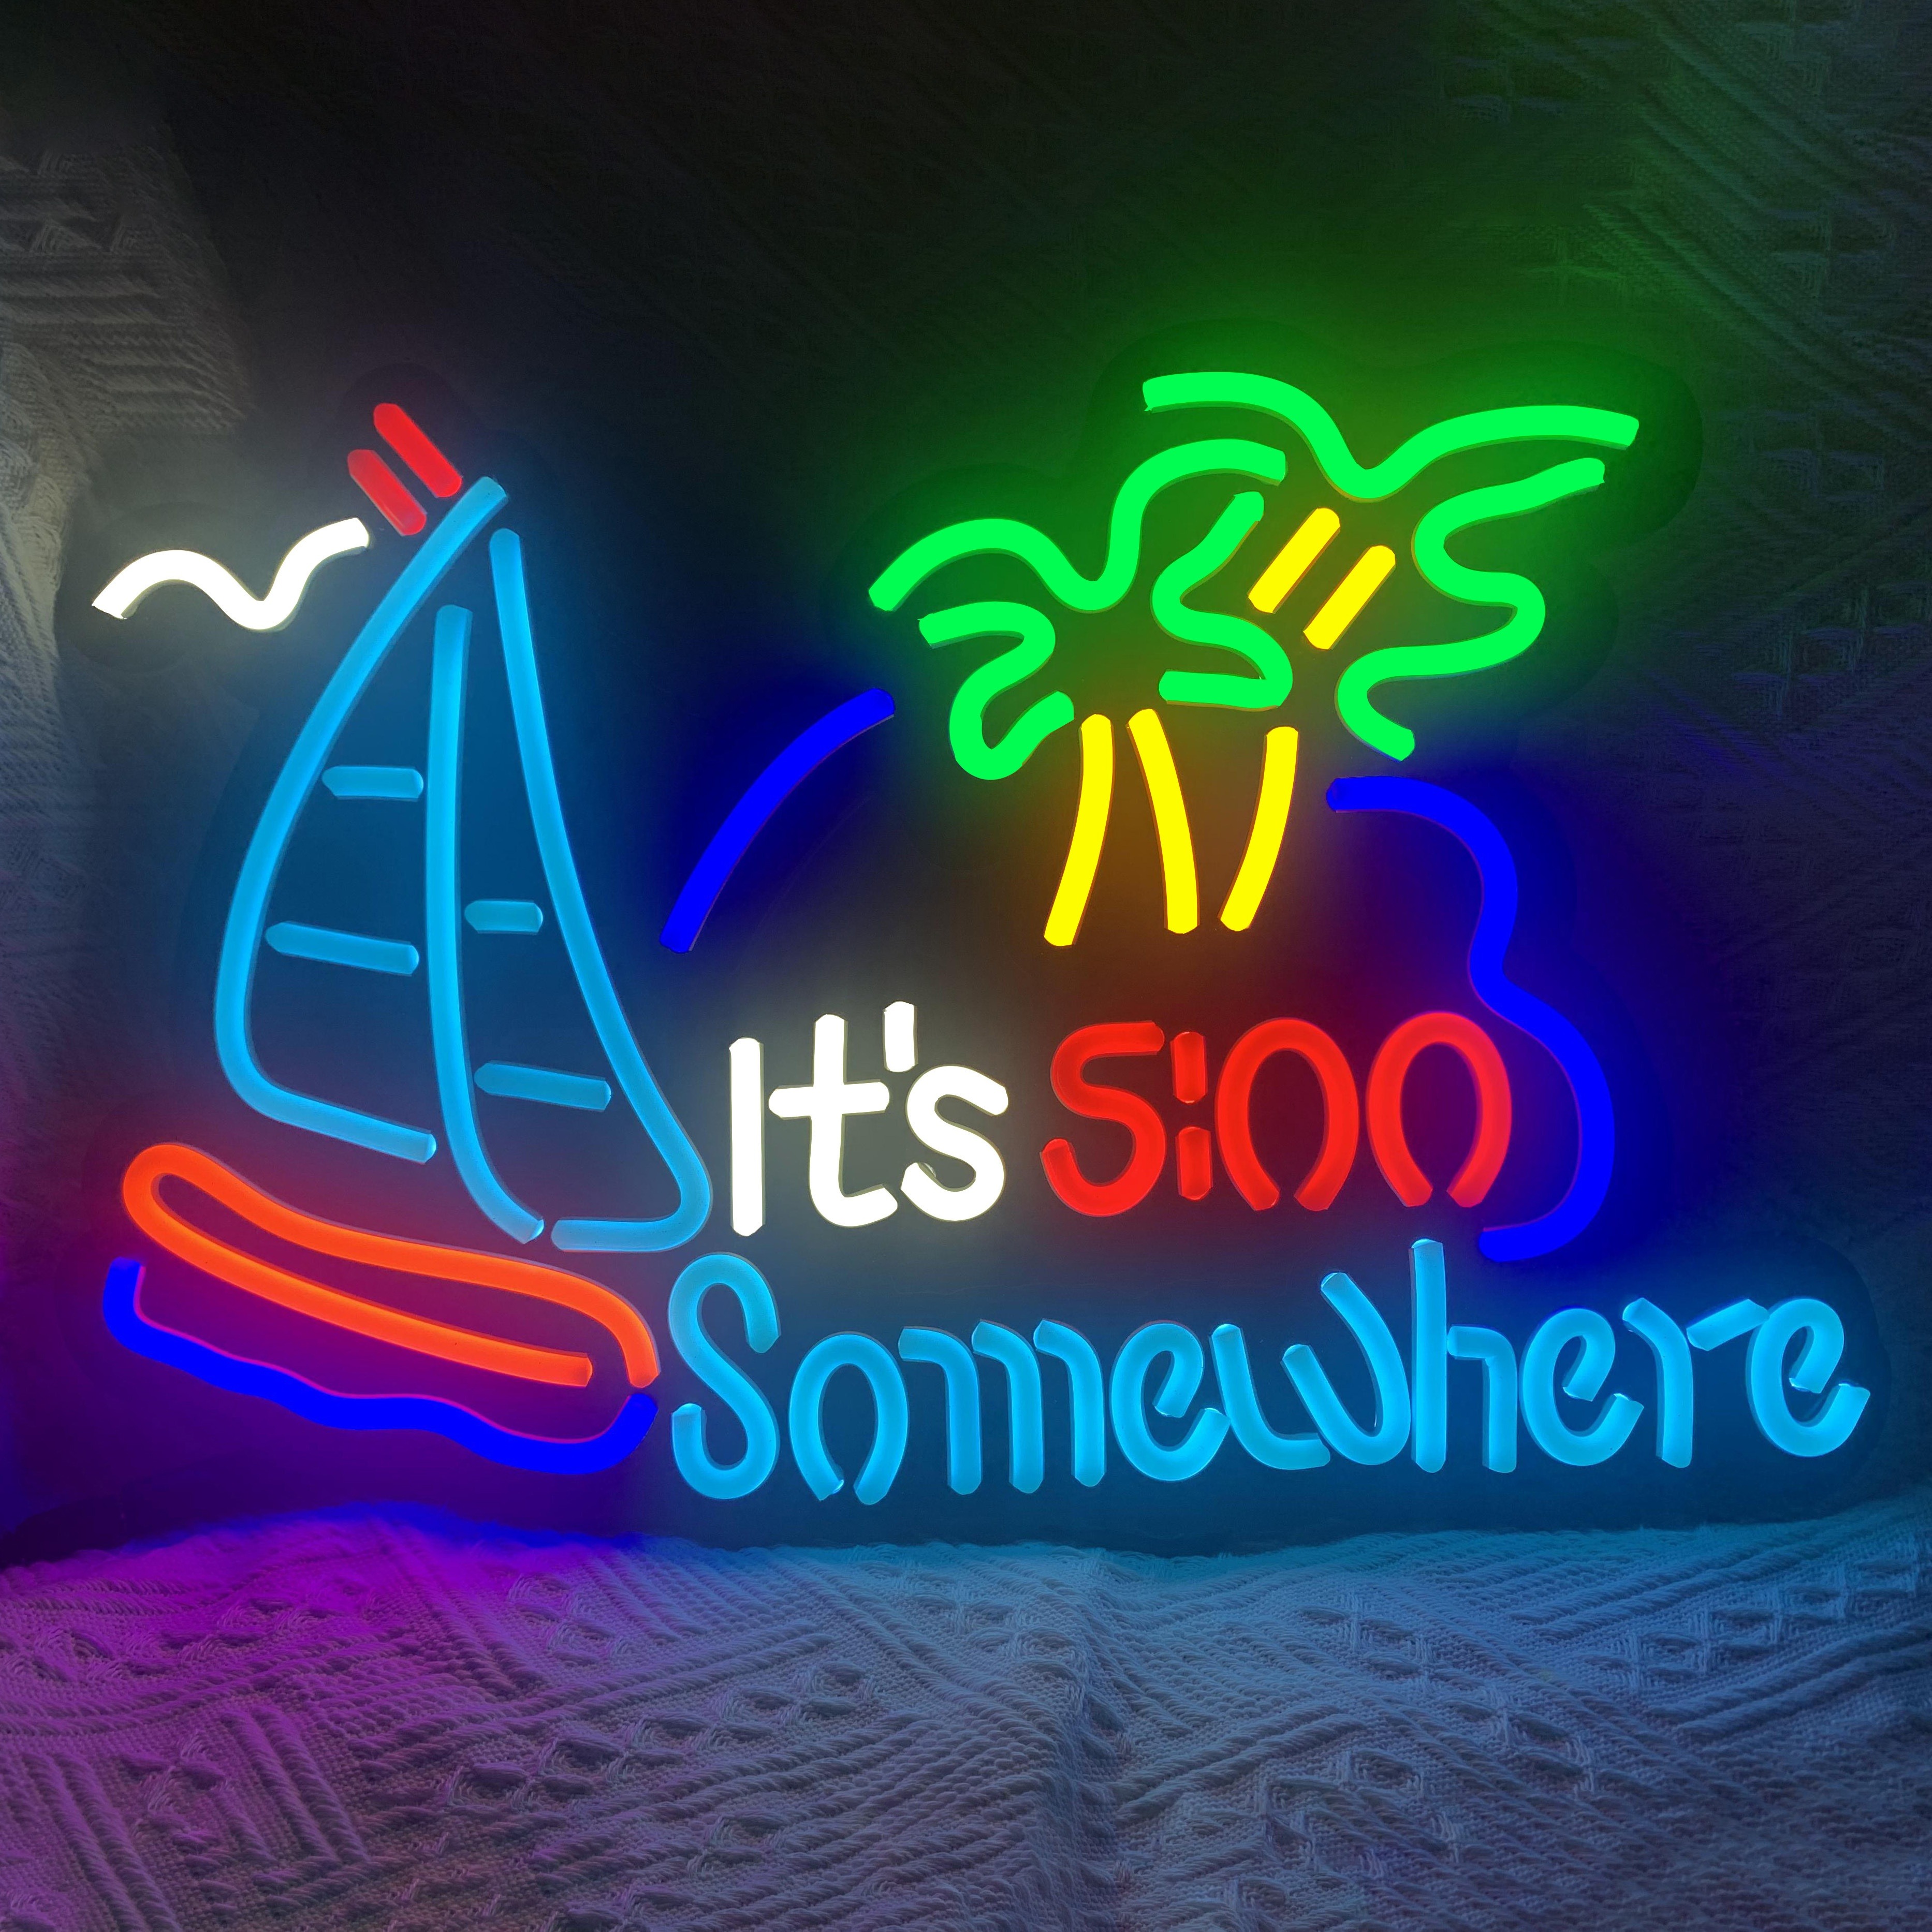 

1pc Ldgj It's 5:00 Somewhere Neon Light Sign, Home Bar Pub Recreation Room Game Lights Windows Wall Signs Party Birthday Bedroom Bedside Table Decoration Gifts